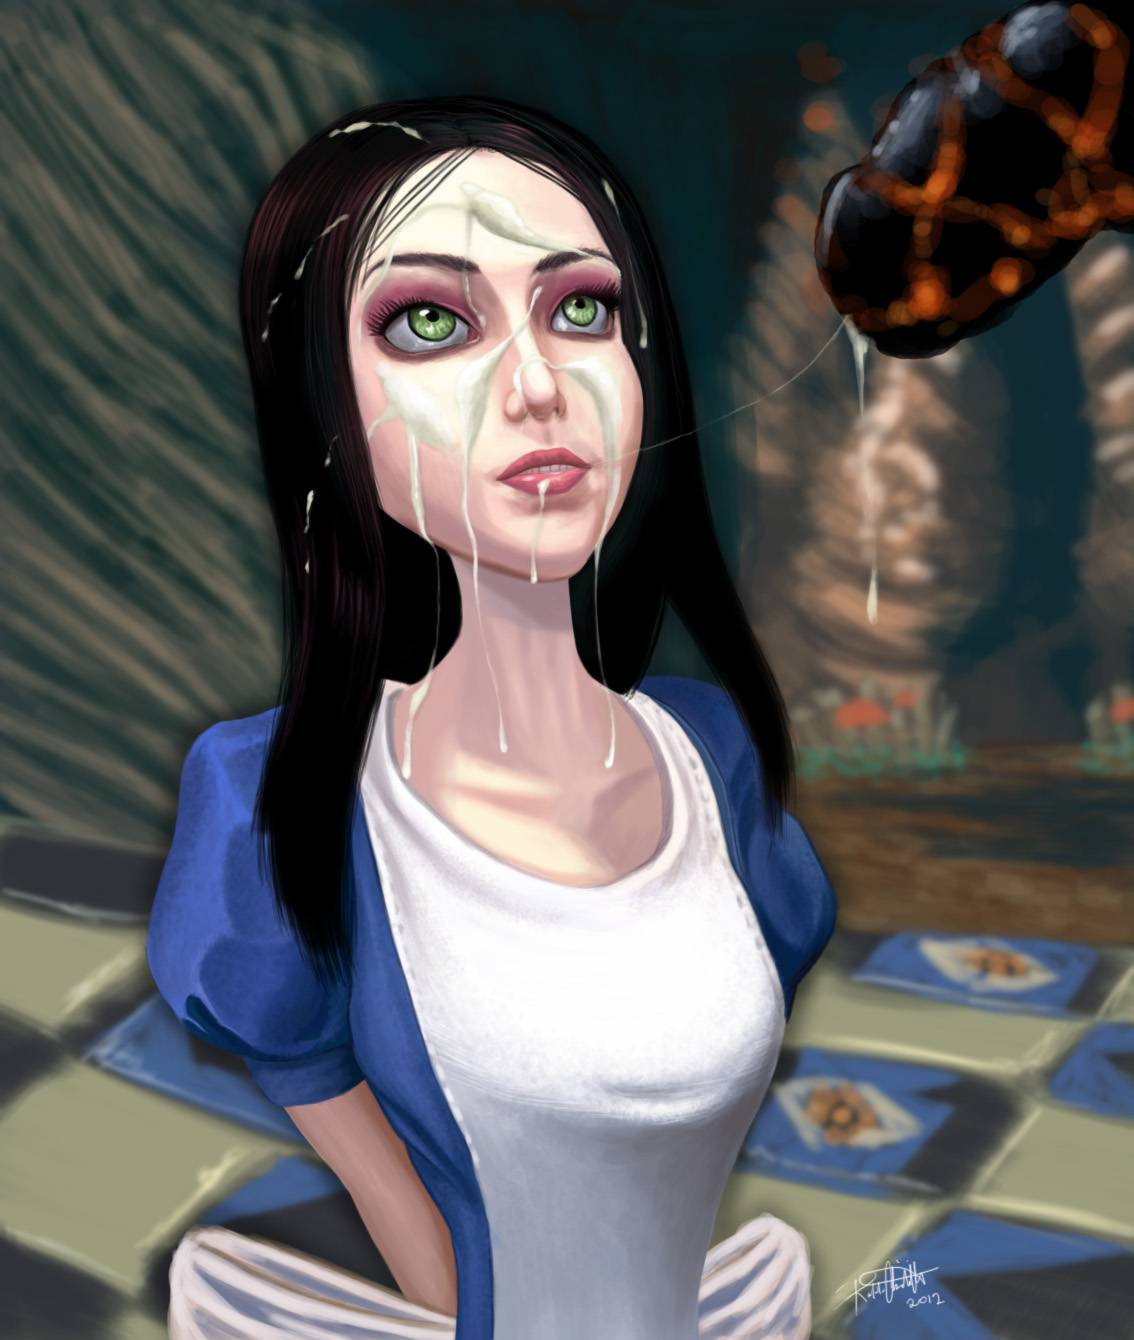 Alice Madness Returns Porn - American McGee's Alice: Madness Returns Rule 34 â€“ Page 4 â€“ Nerd Porn!